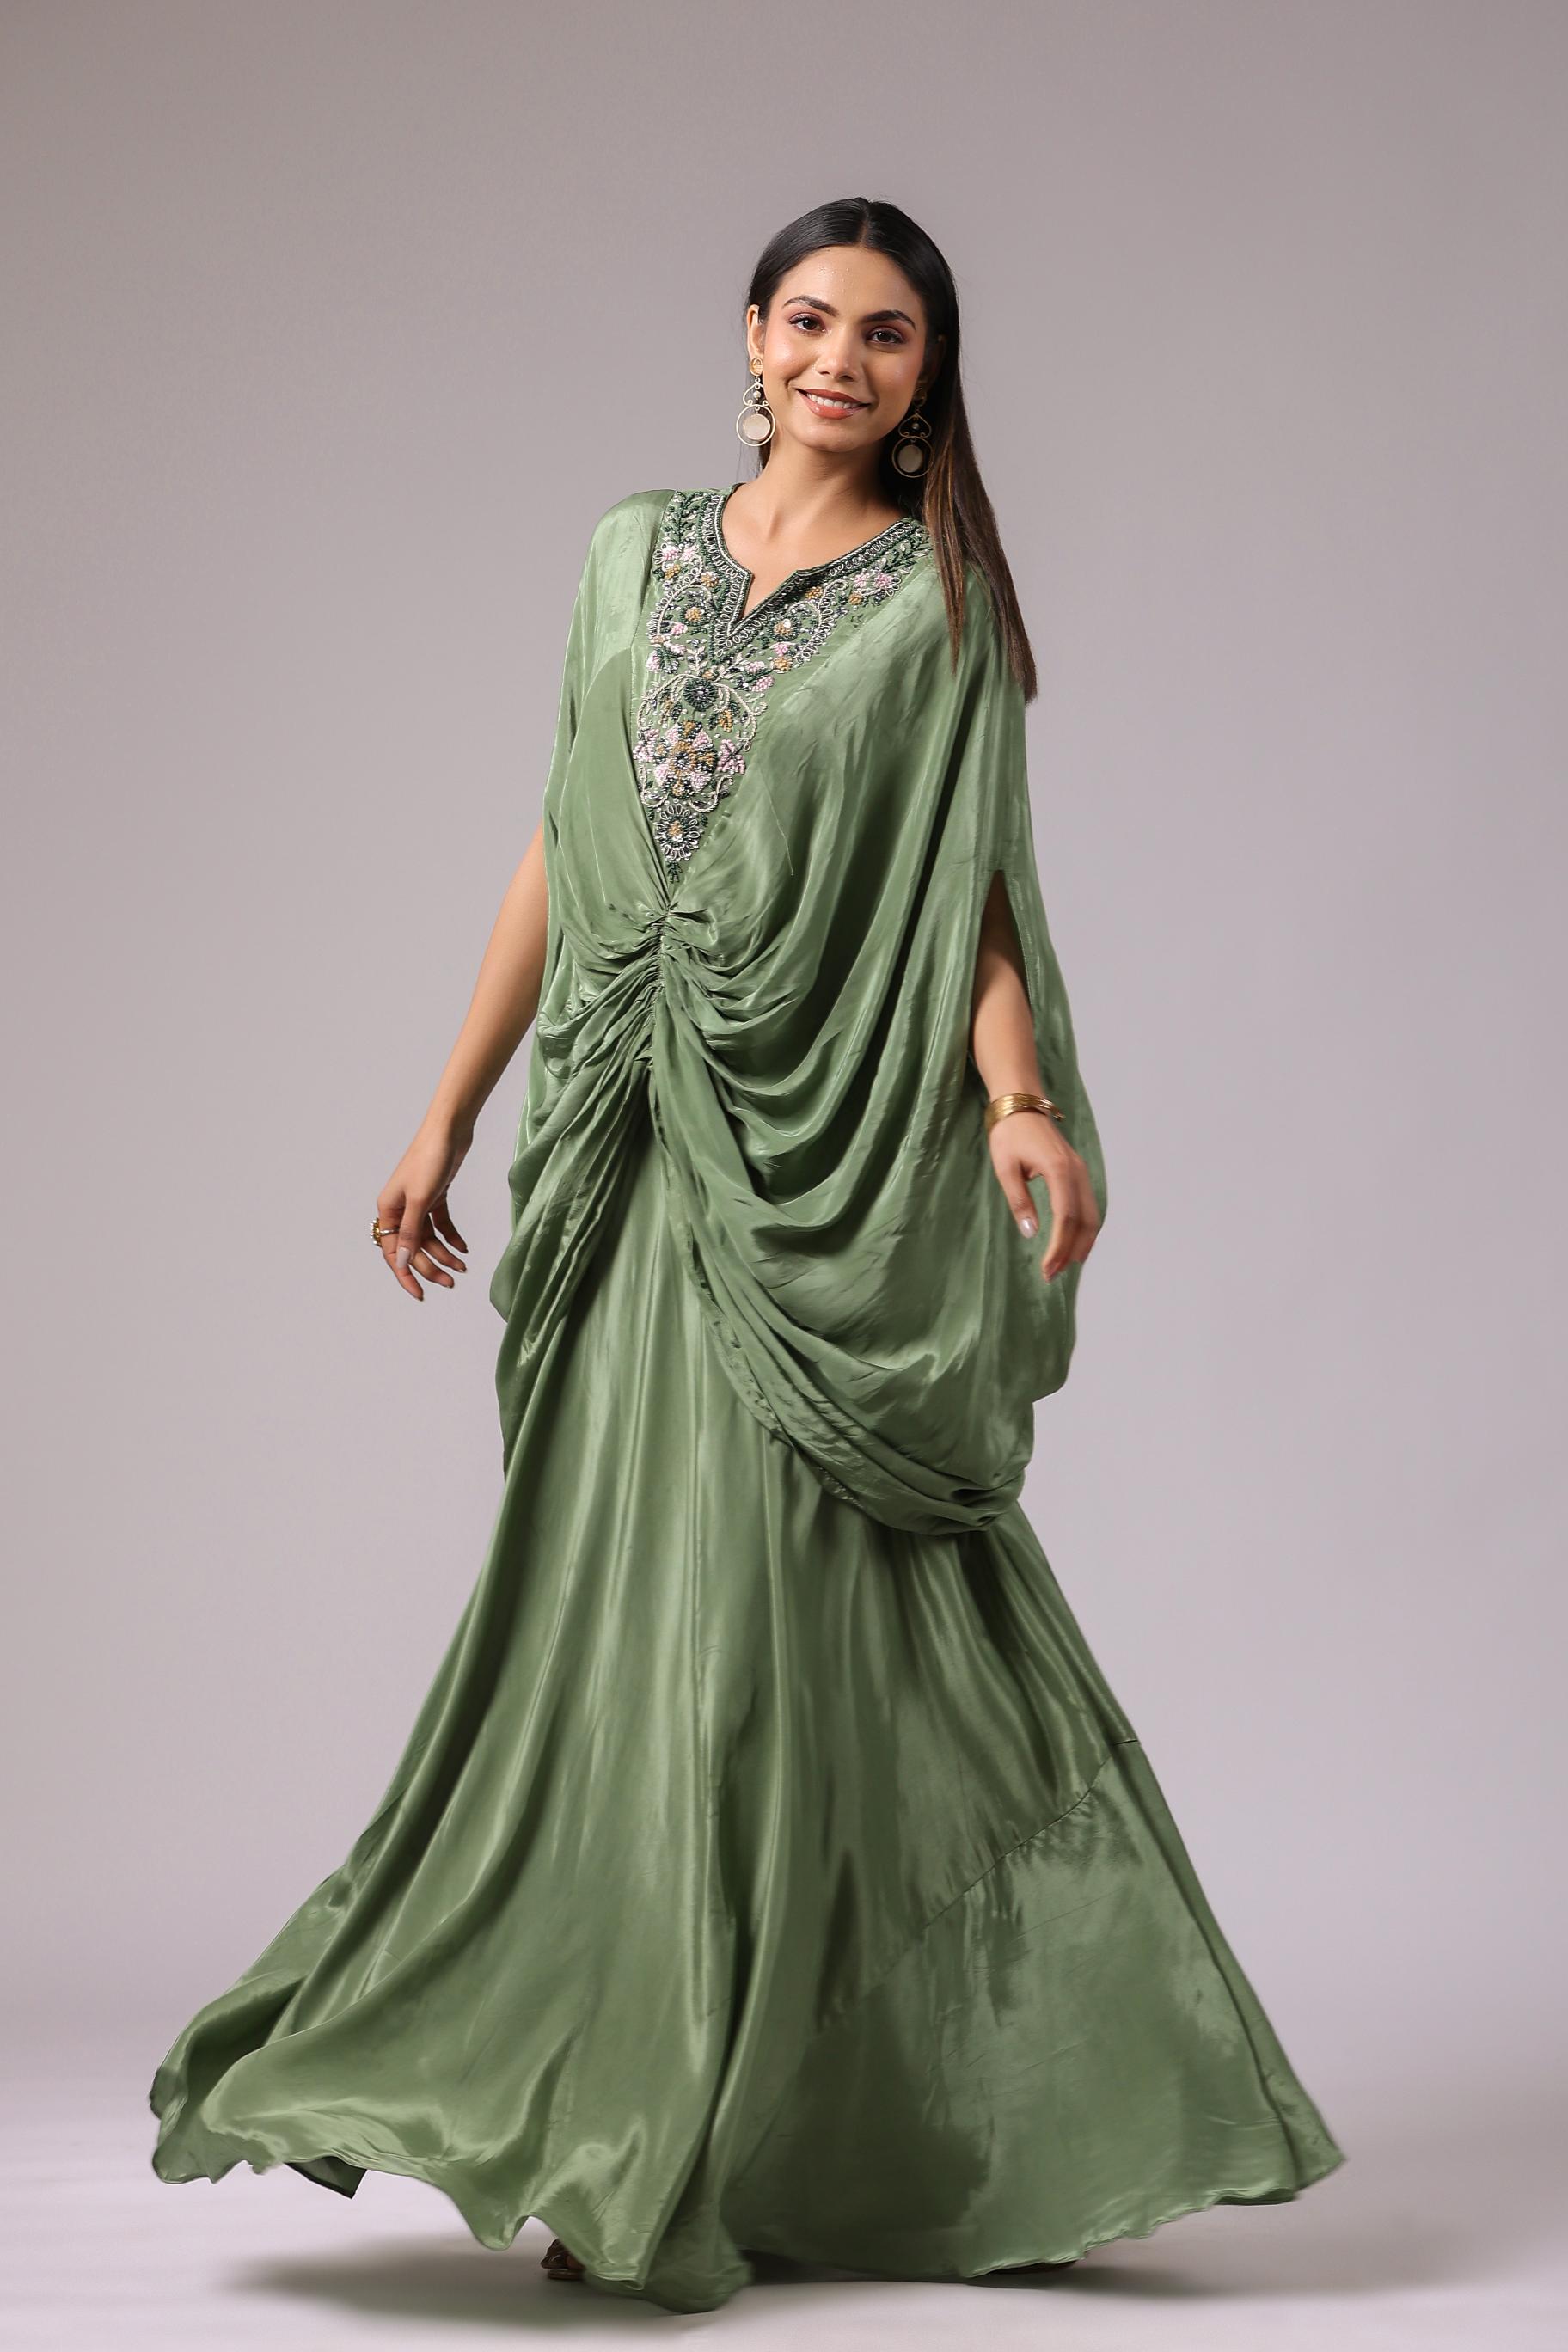 Fern Green Embroidered Crepe Silk Draped Gown